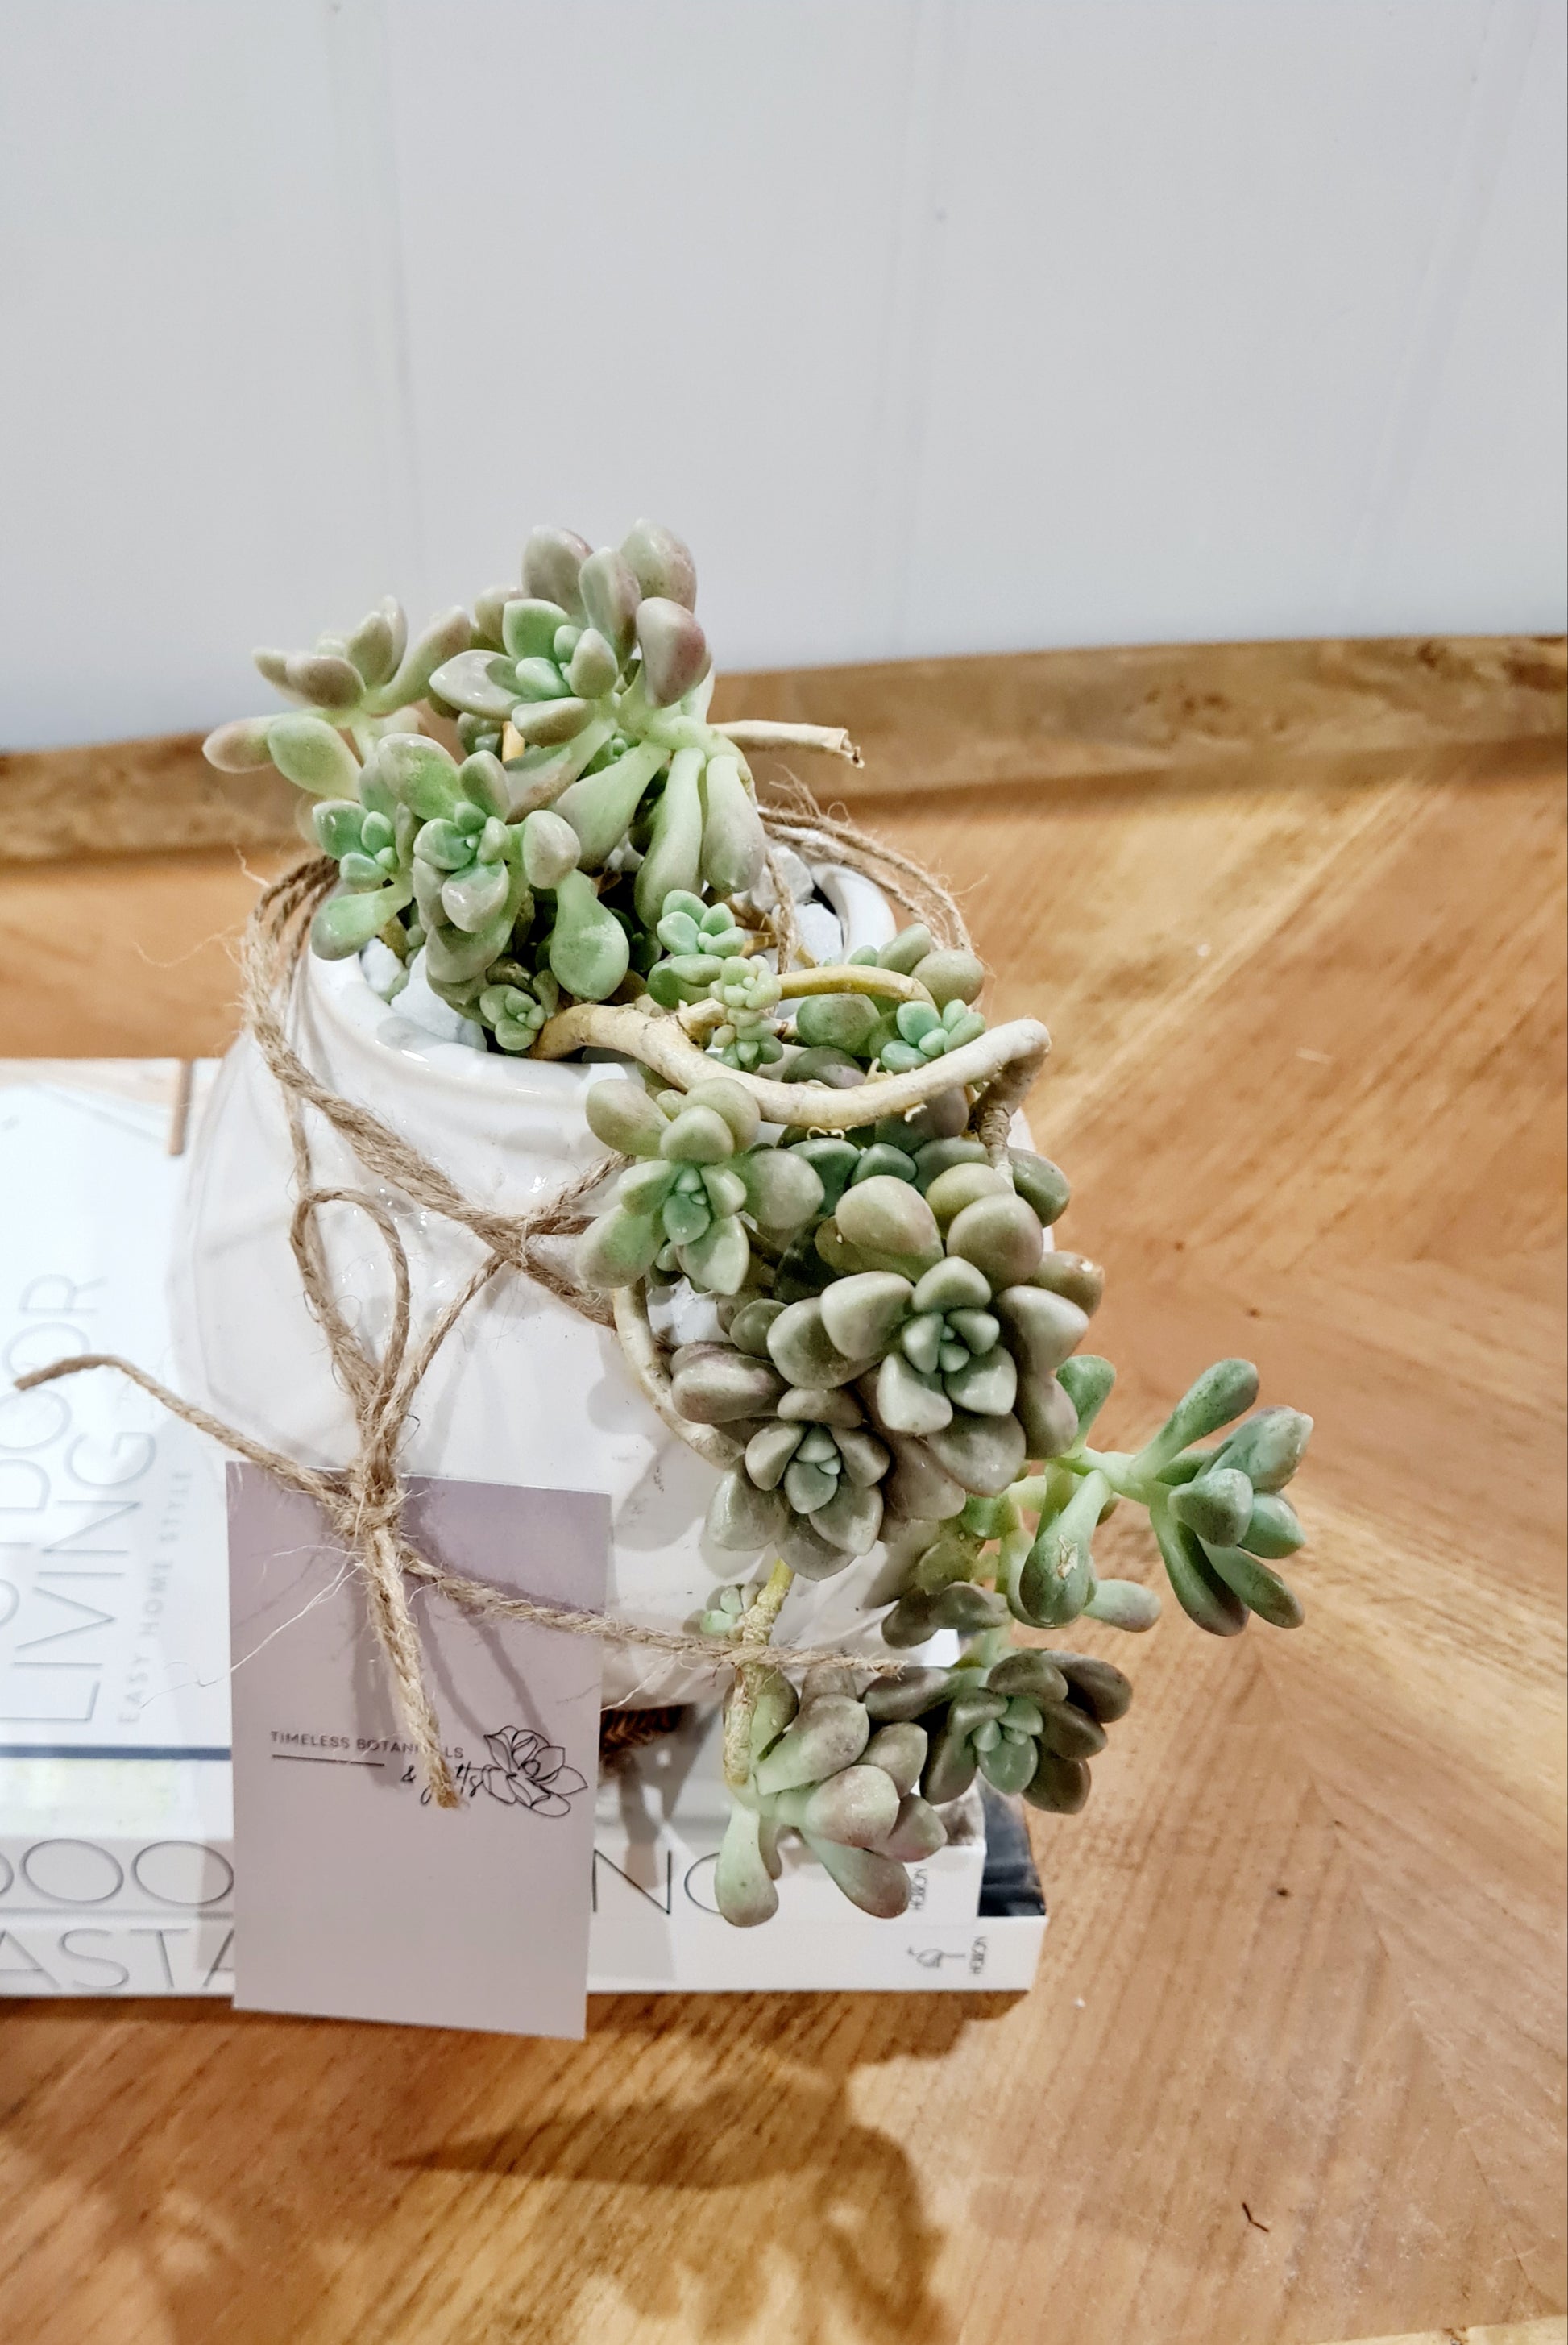 Succulents  plants for gifts - Perth delivery 